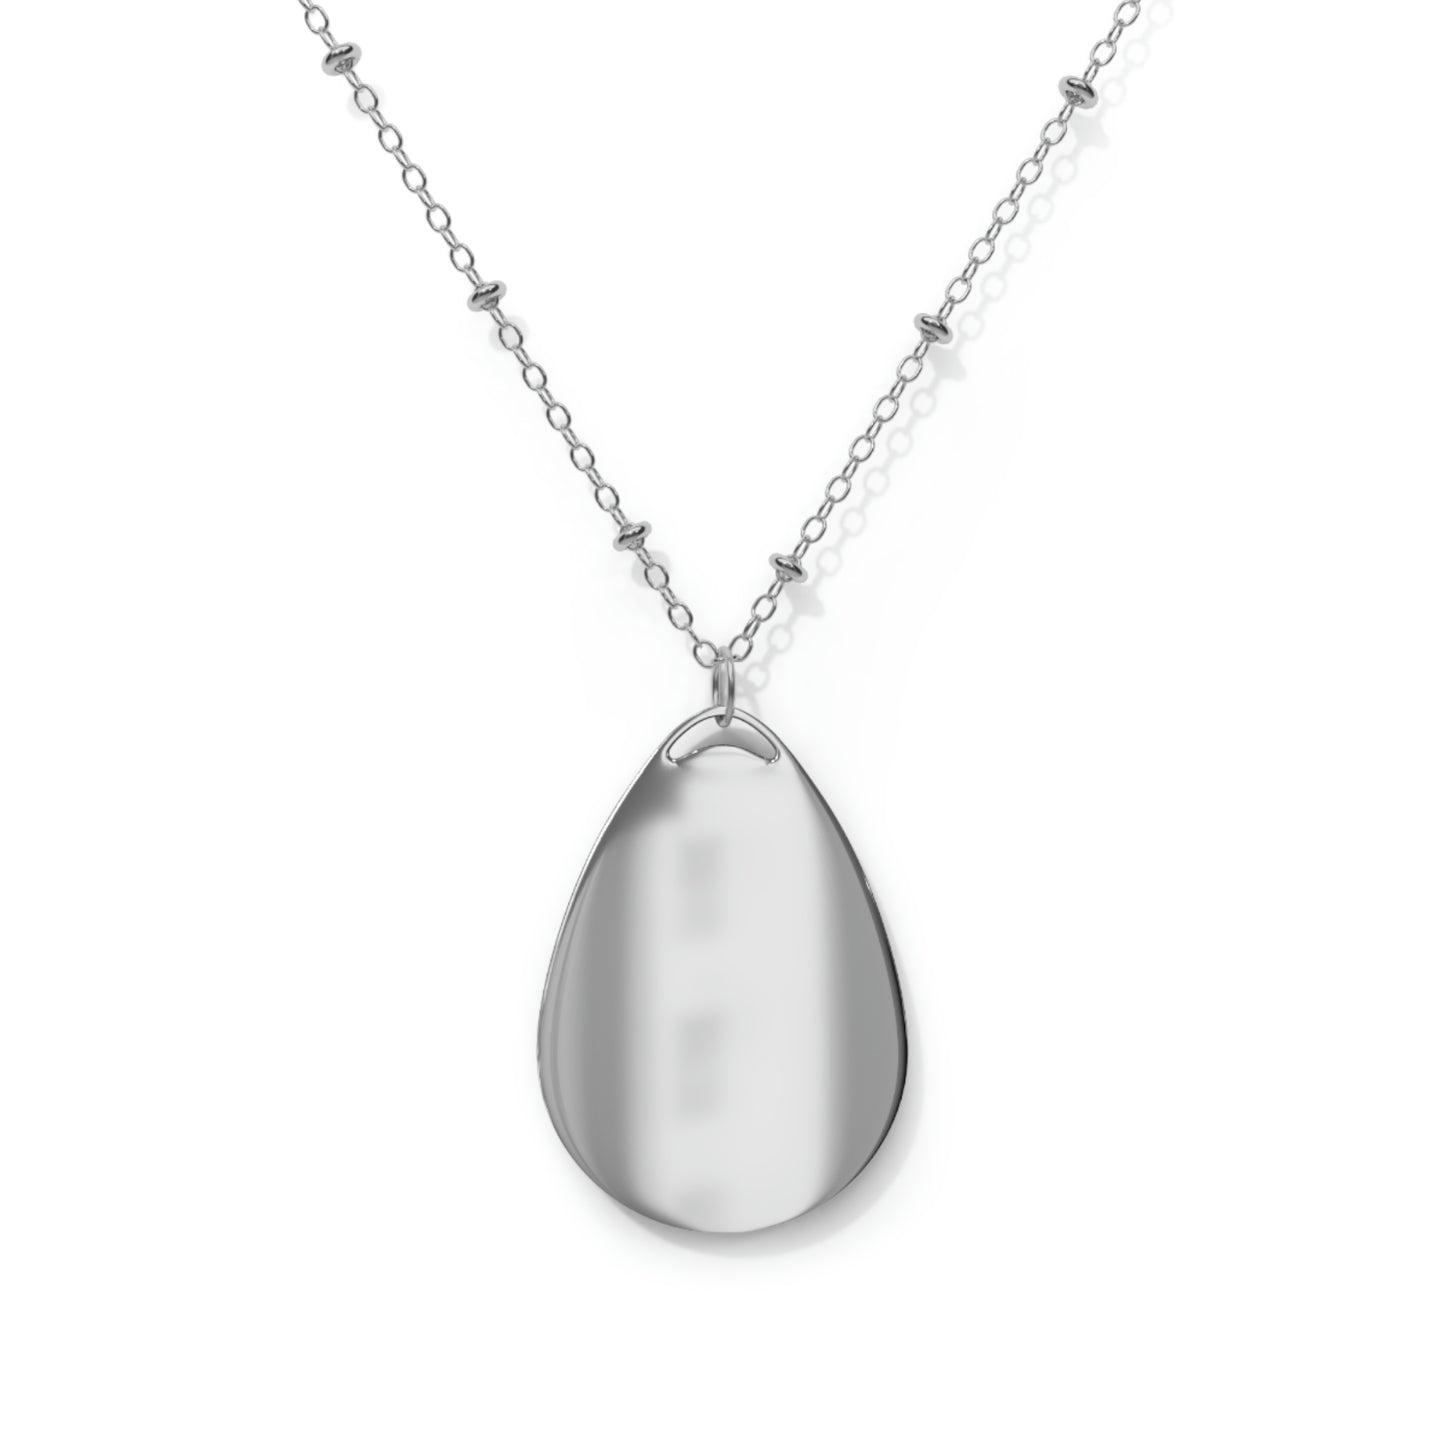 Shayna Michelle Oval Necklace